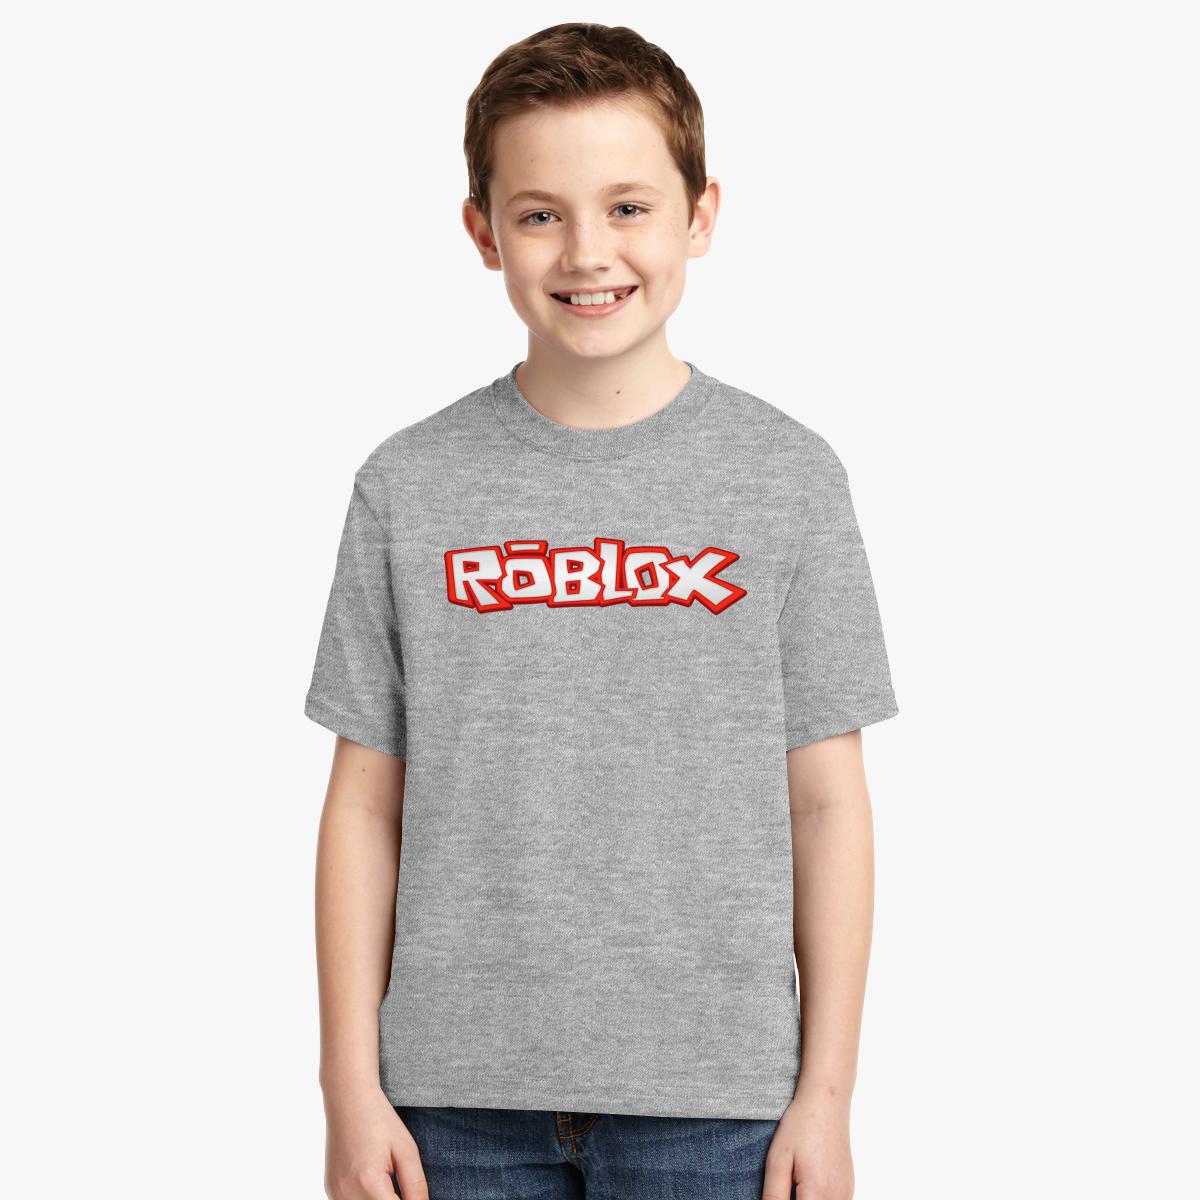 Roblox Shirts In Real Life Toffee Art - roblox shirts in real life